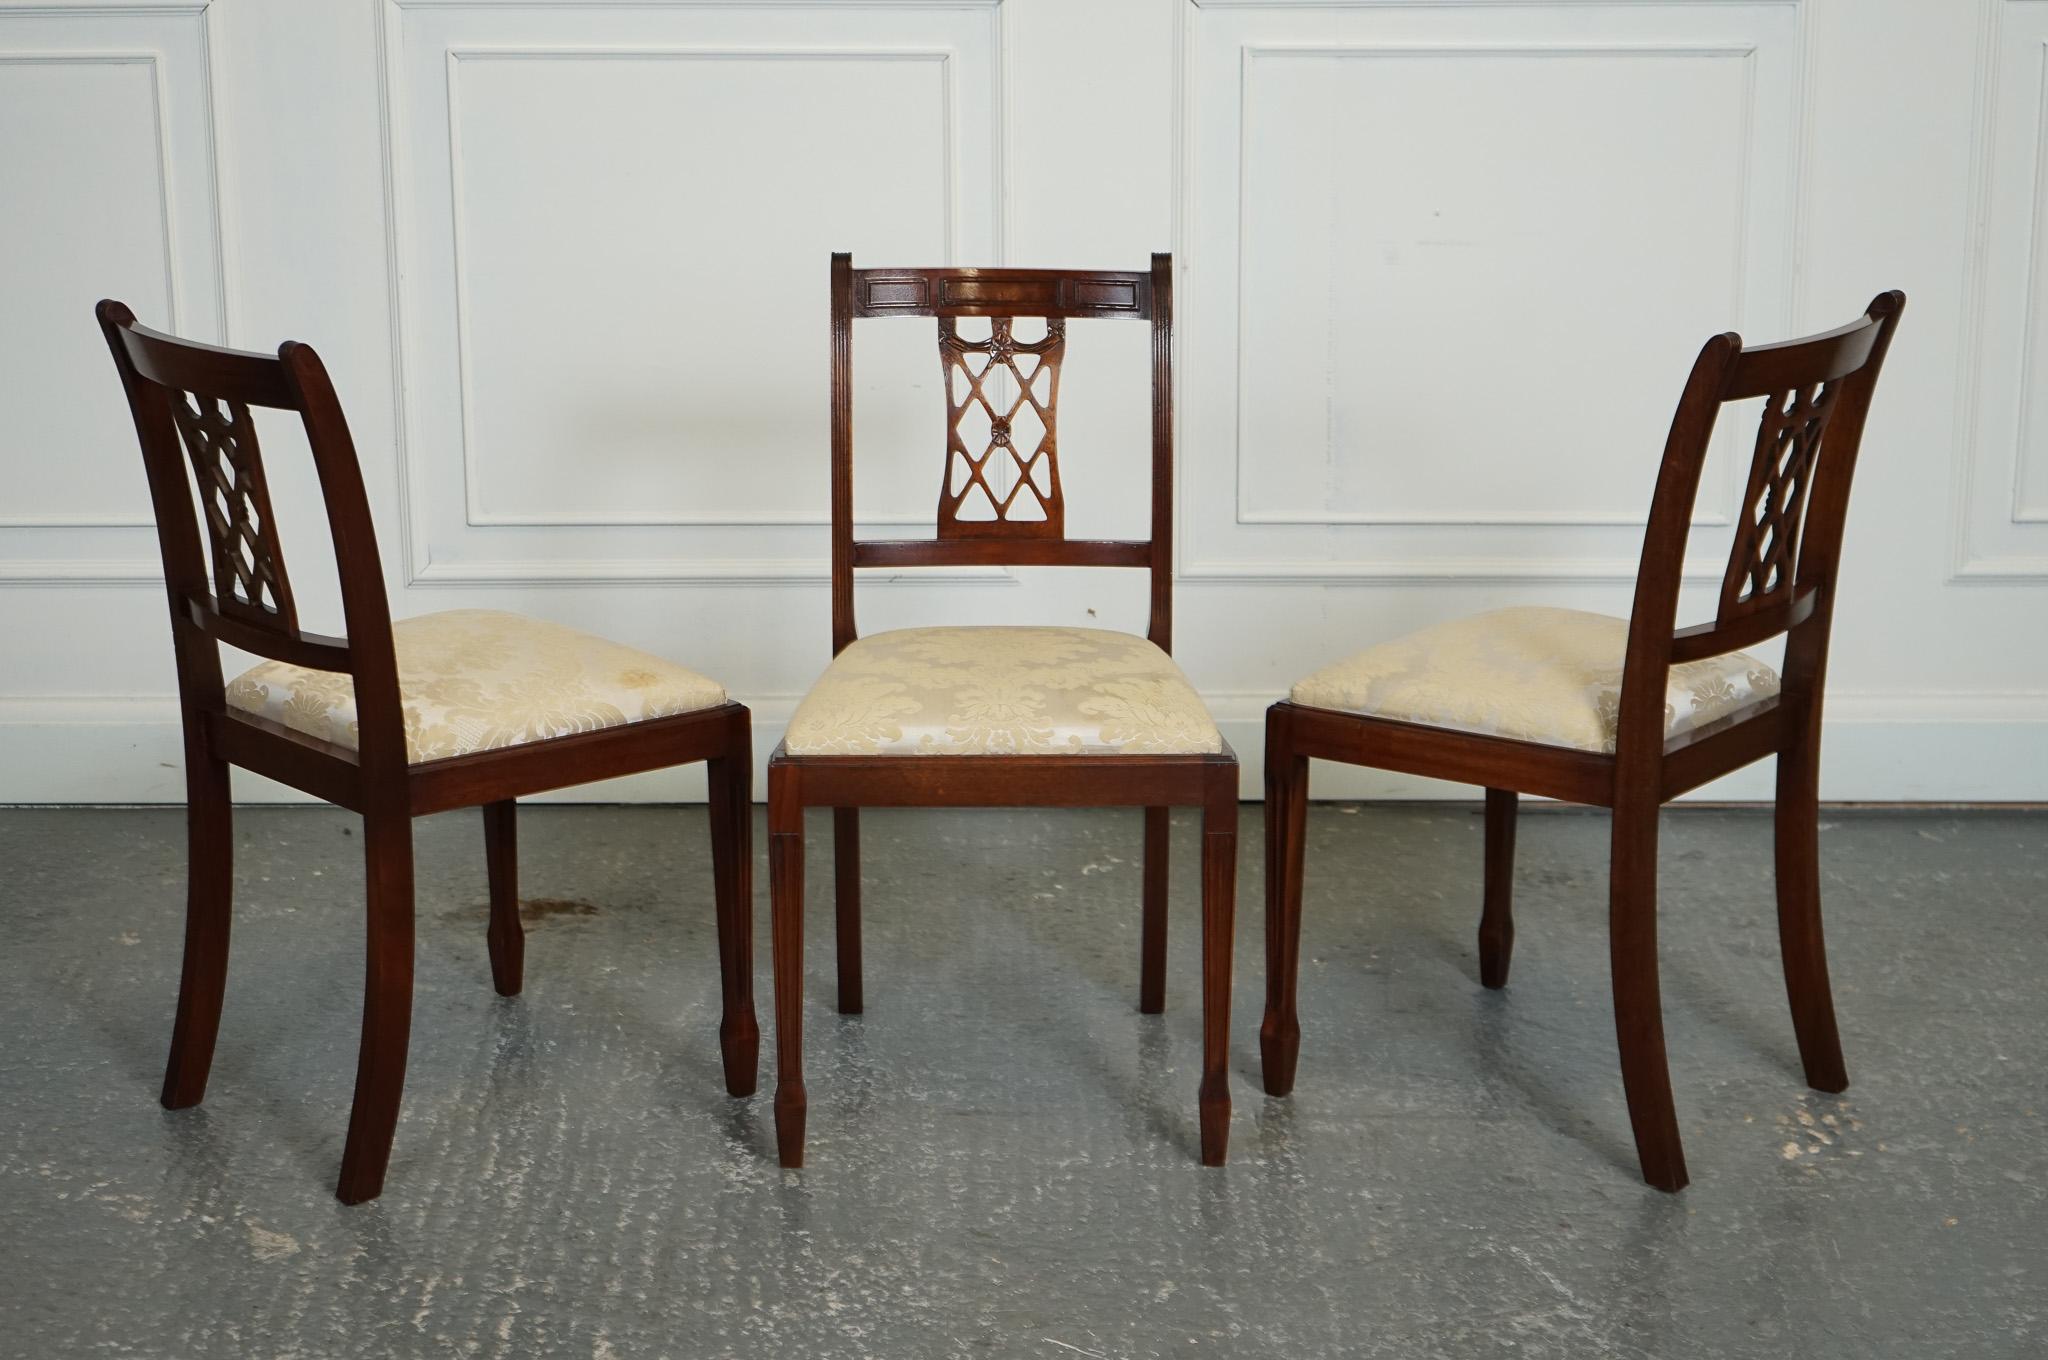 Hand-Crafted HEPPLEWHITE STYLE BEVAN FUNNELL SET OF 5 DINING CHAiRS CREAM UPHOLSTERED SEATS For Sale